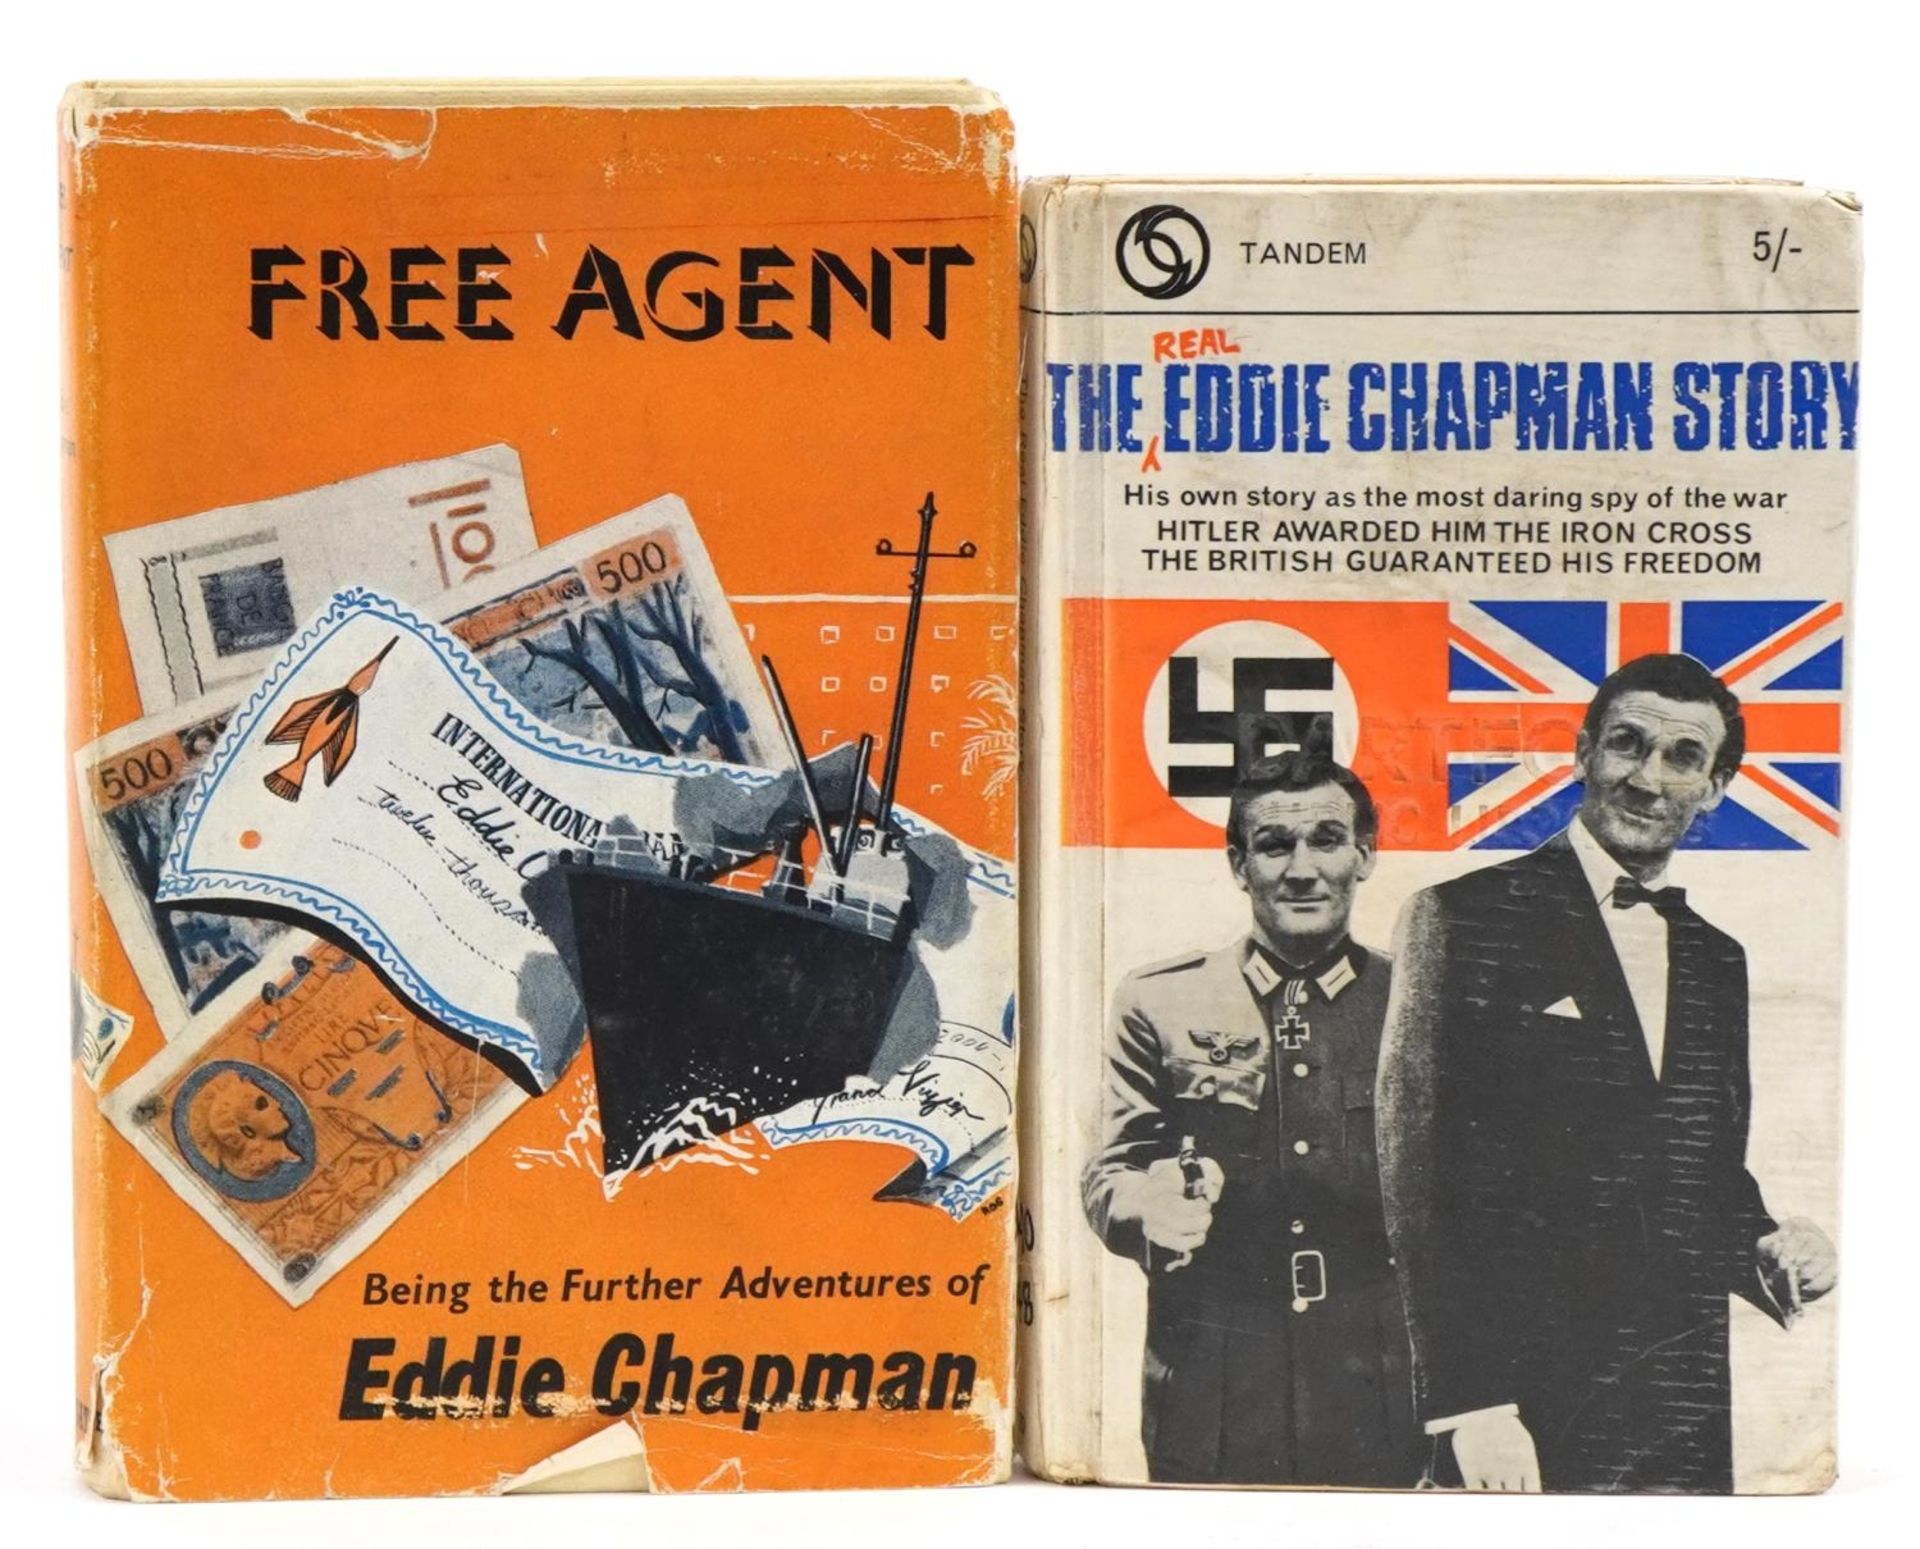 Two Eddie Chapman hardback books comprising The Real Eddie Chapman Story and Free Agent For